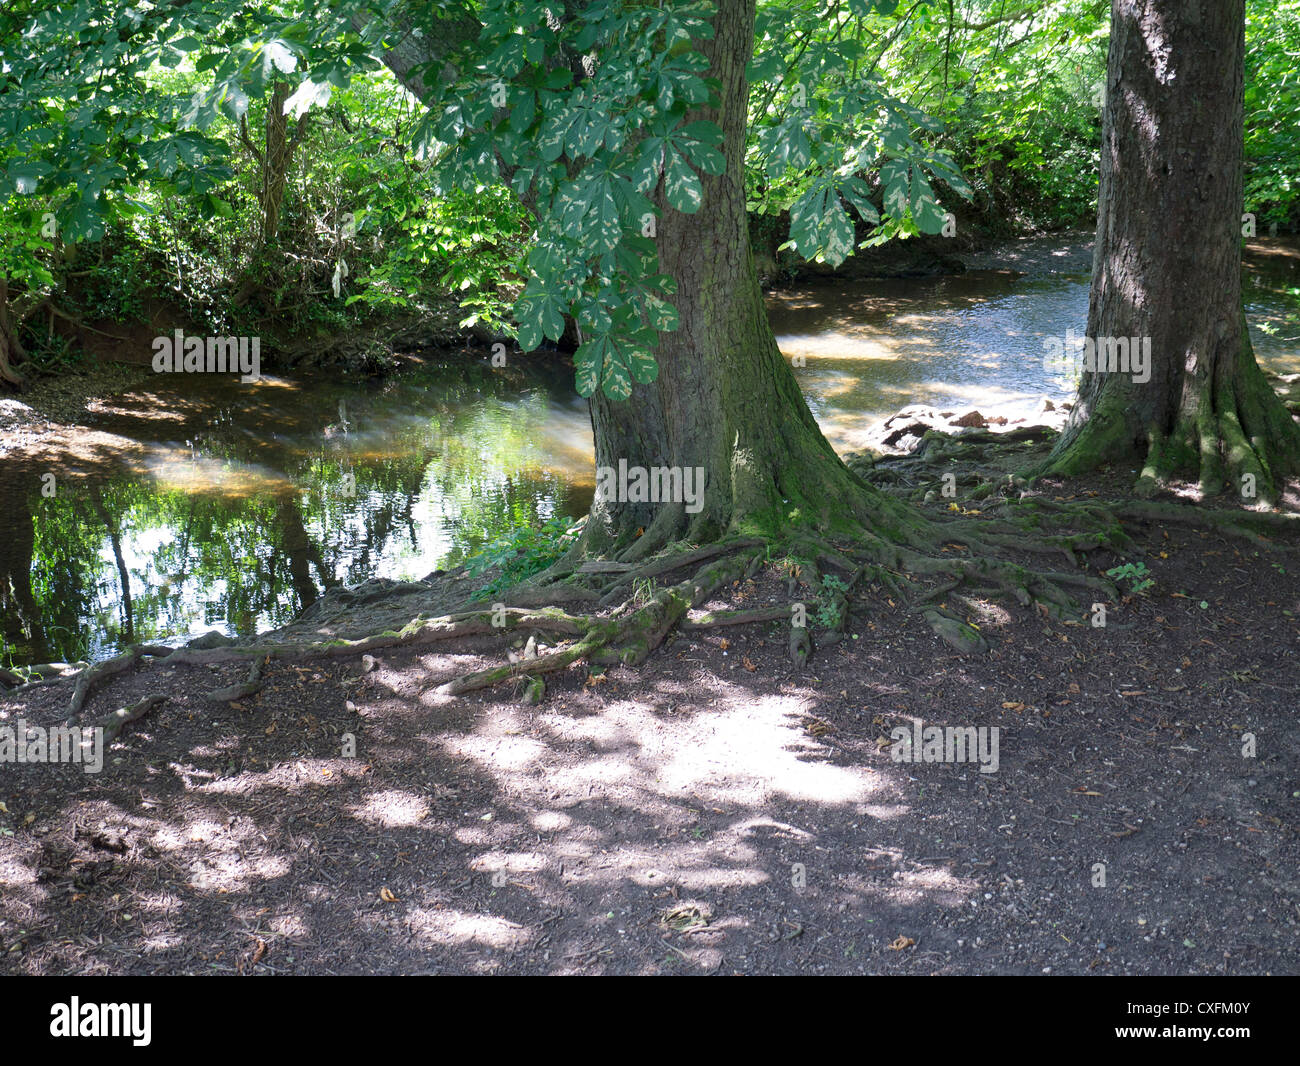 england midlands worcestershire valley of the river arrow redditch Stock Photo